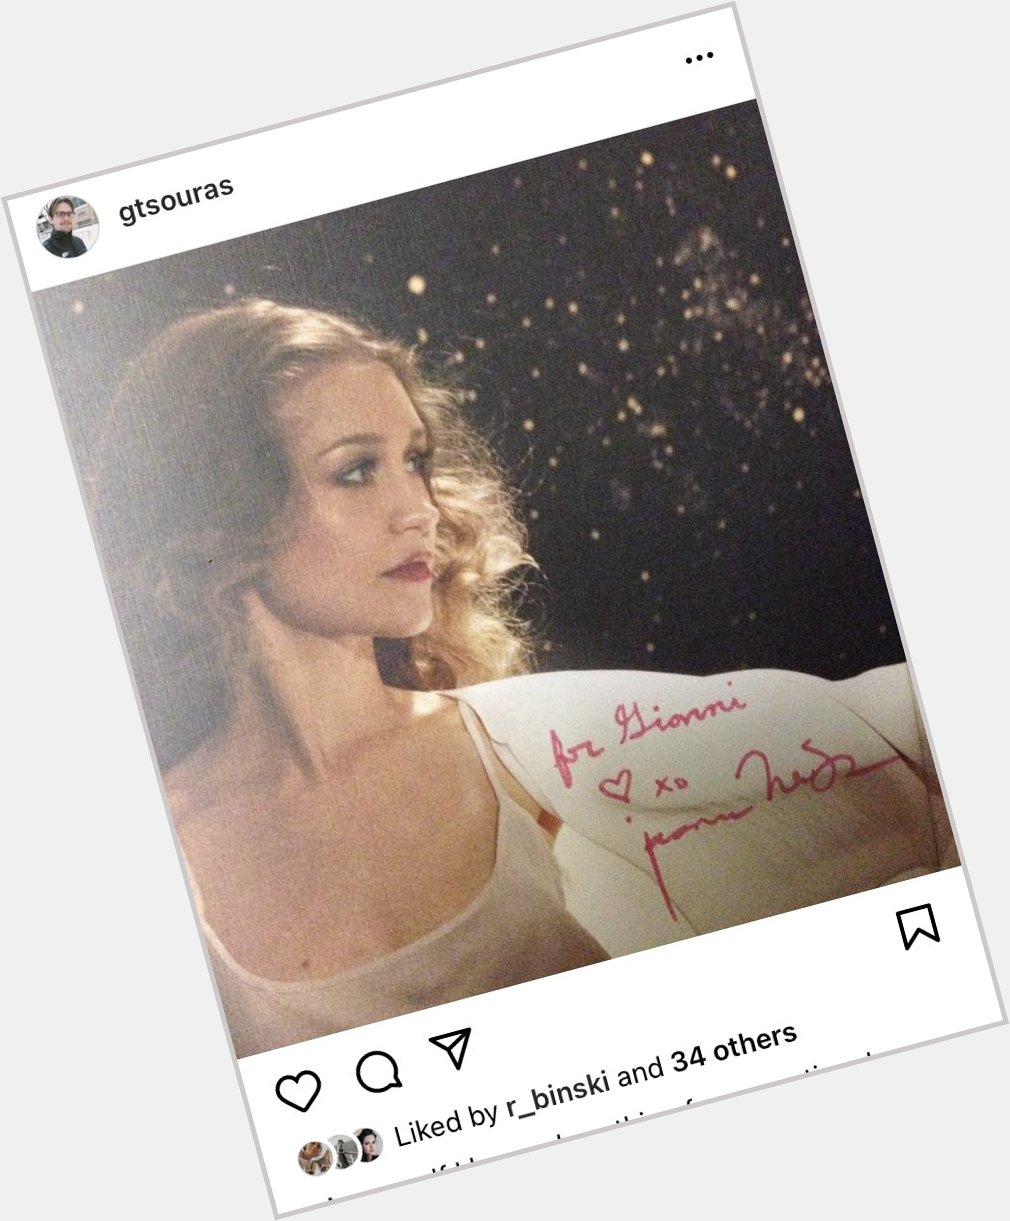 Awww I was so happy the night I met Joanna Newsom as a wee 24 year old grad student :,) happy 40th birthday queen 